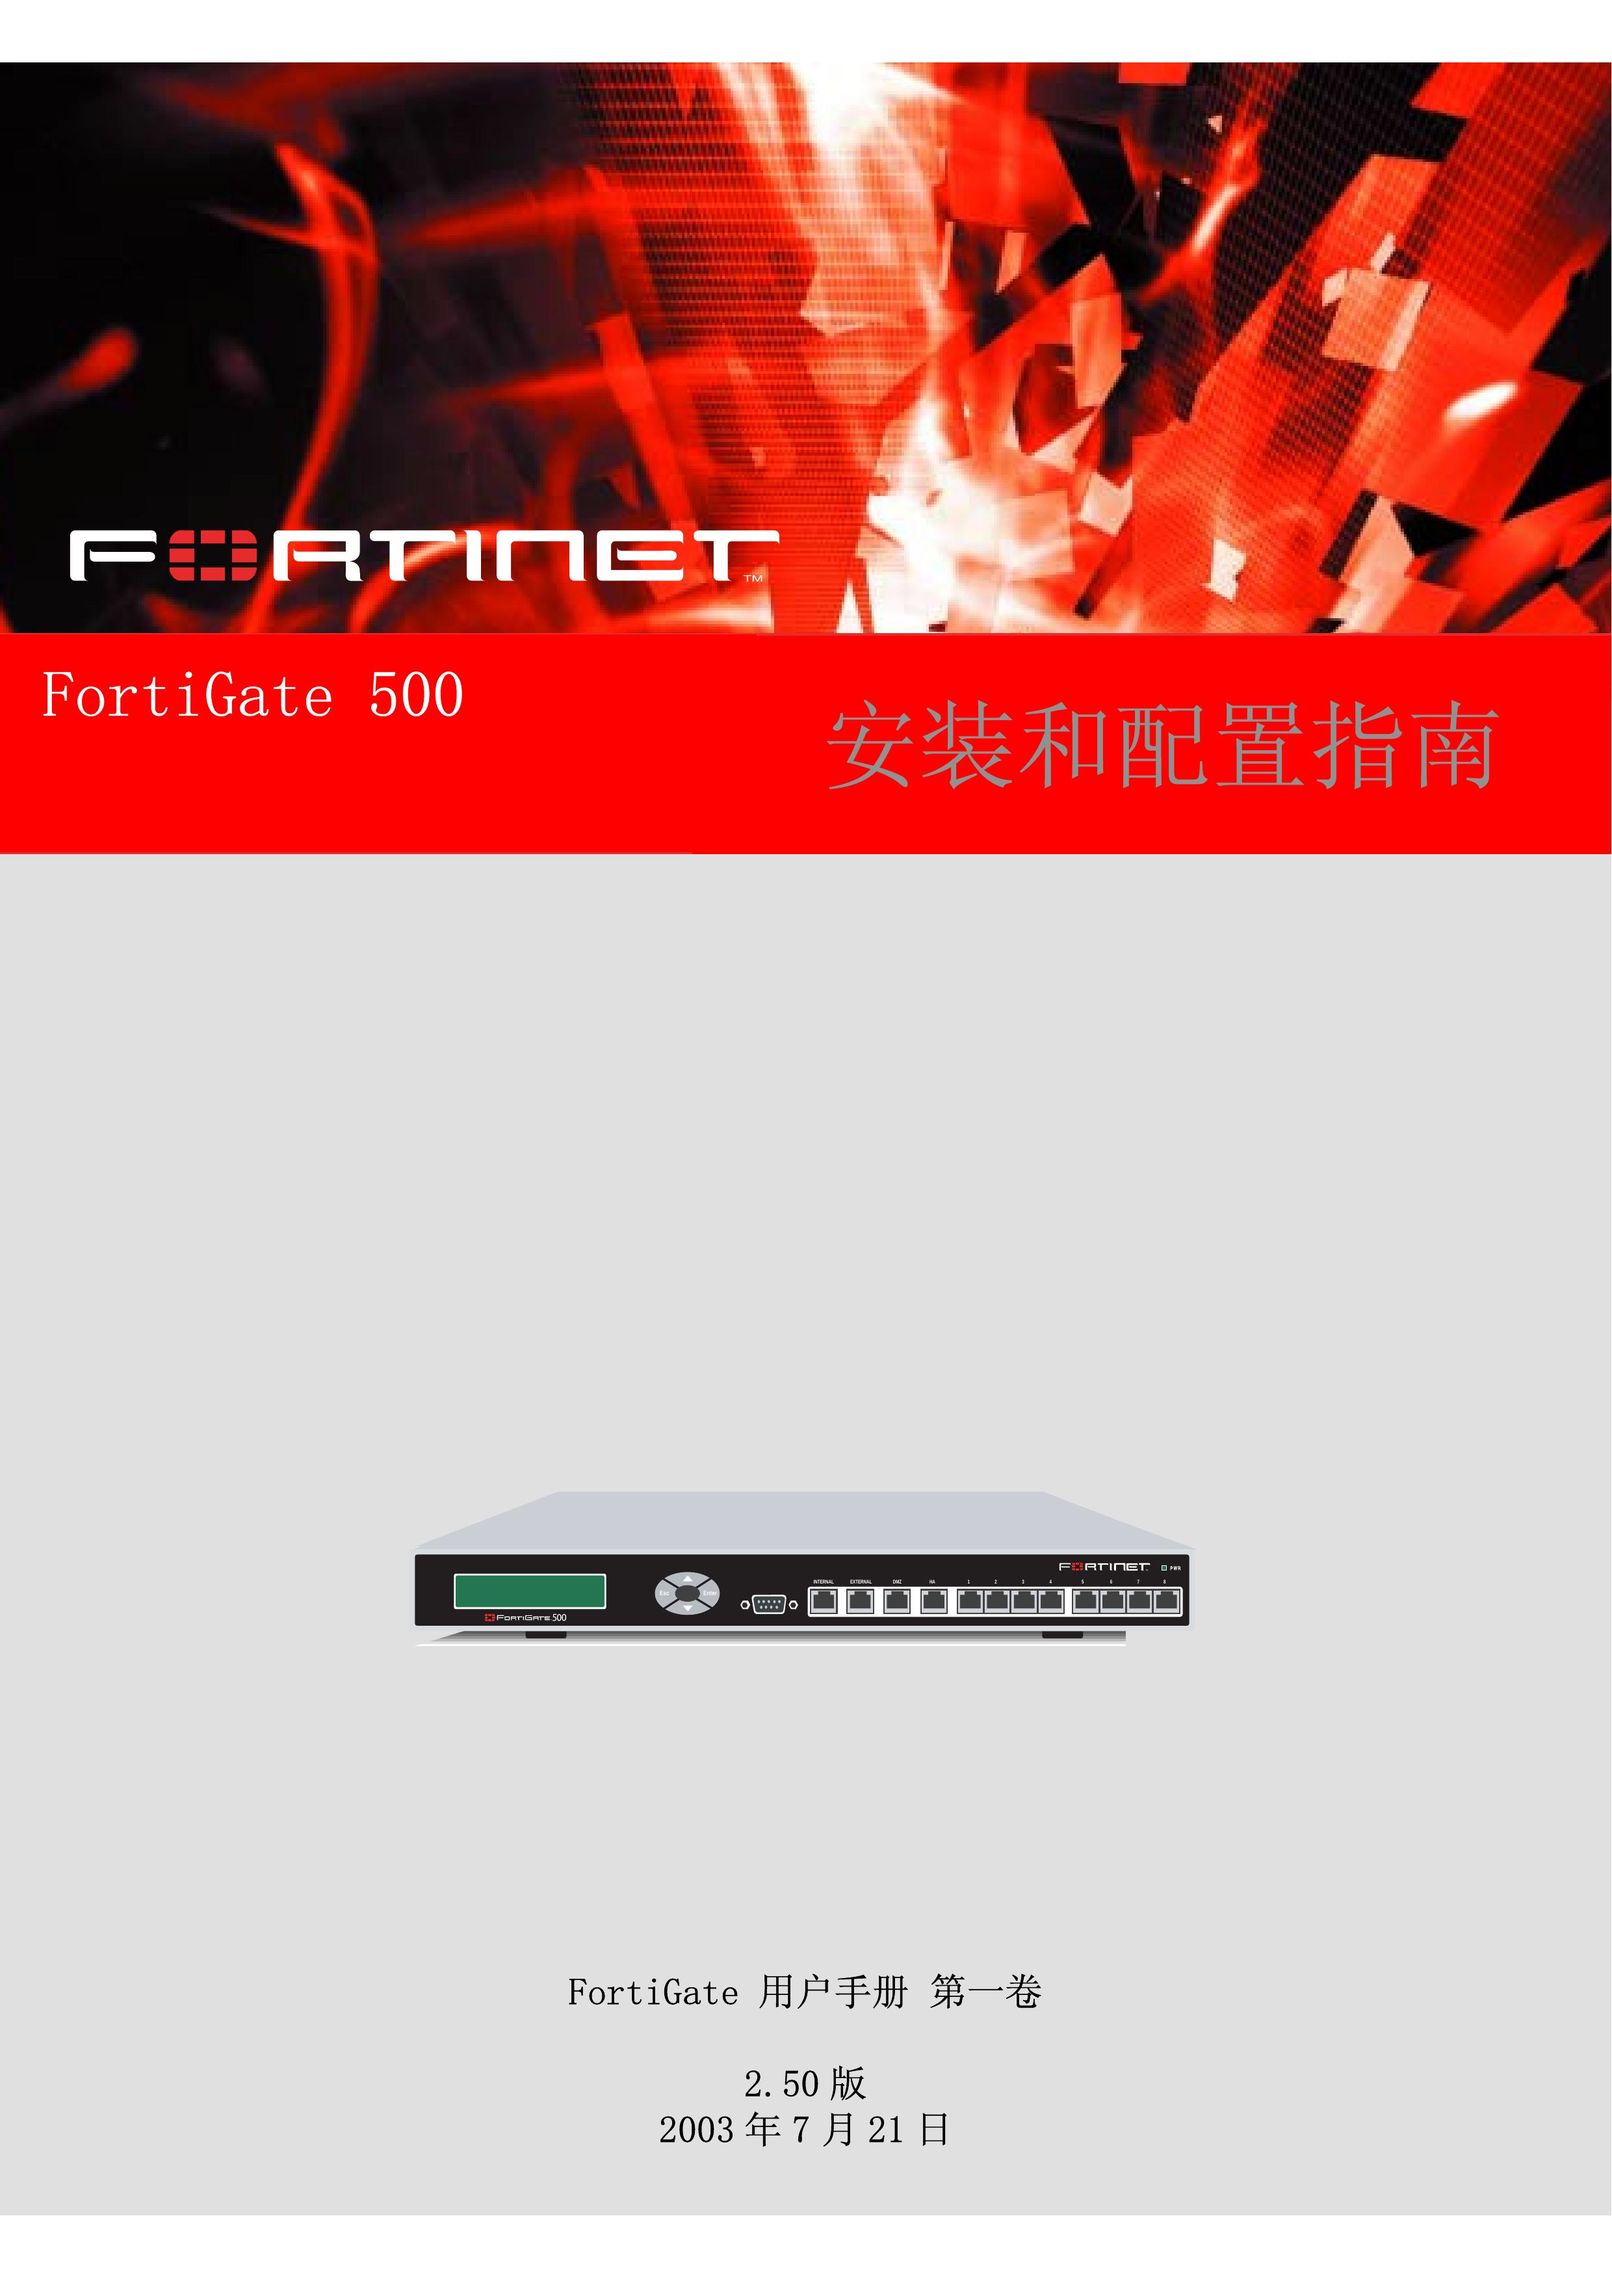 Fortinet 500 Network Card User Manual